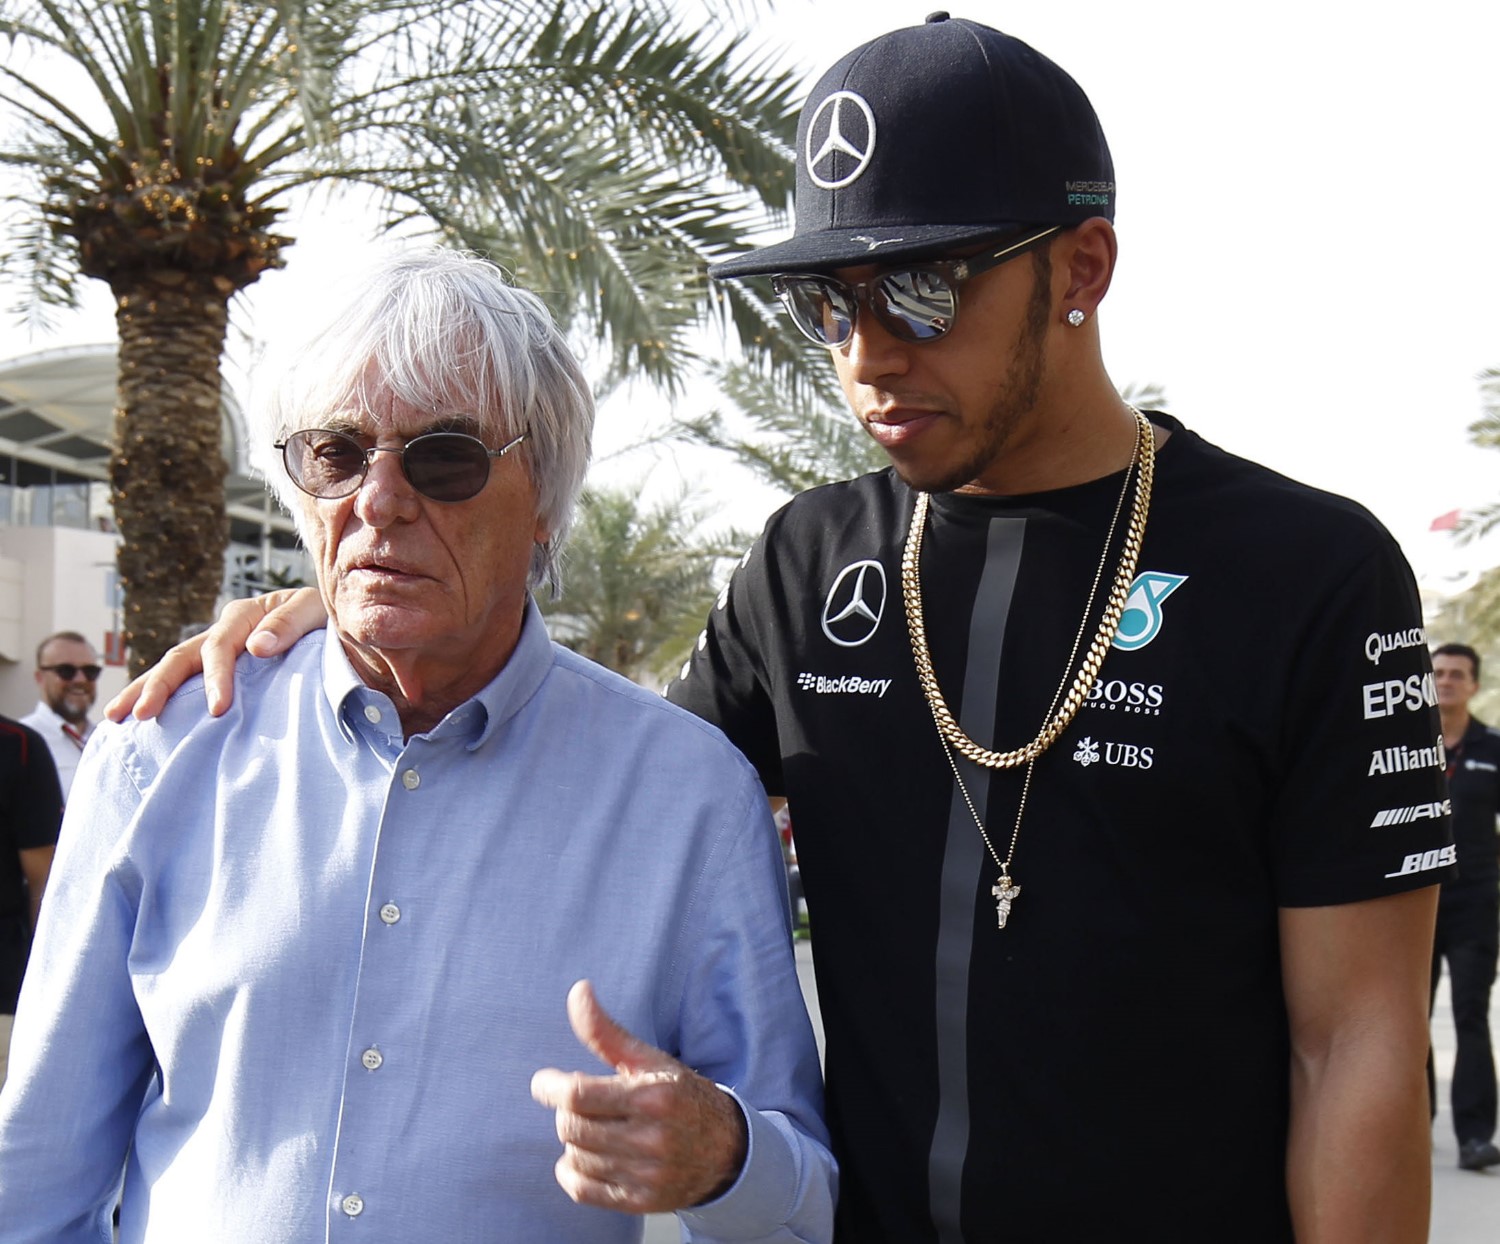 Ecclestone (L) says ridiculous Musical Chairs qualifying may continue